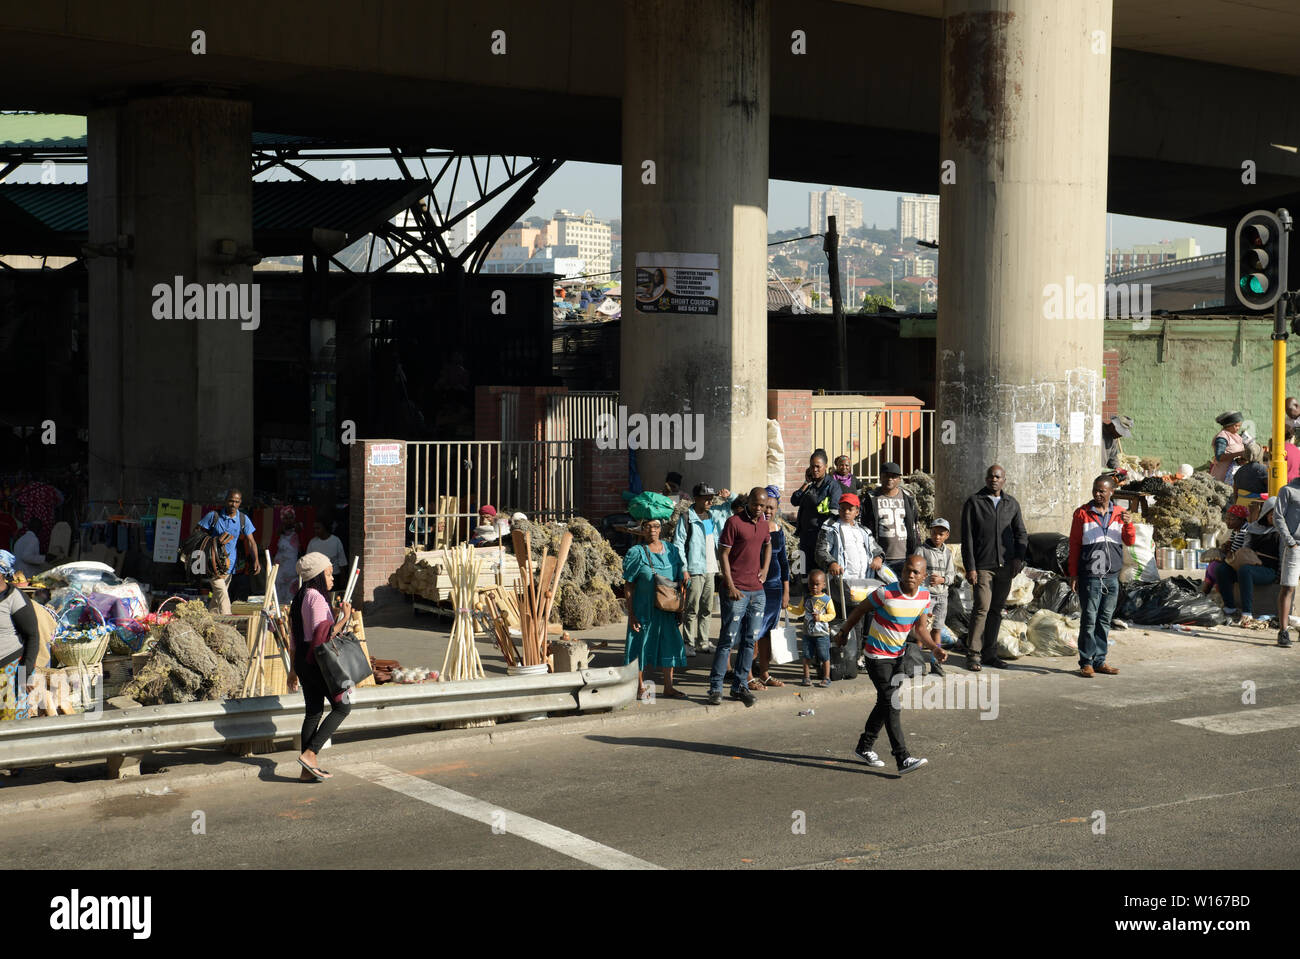 Durban, South Africa, adult man jaywalking, crowd of people standing at intersection, cityscape, street, candid photography, everyday, lifestyle Stock Photo